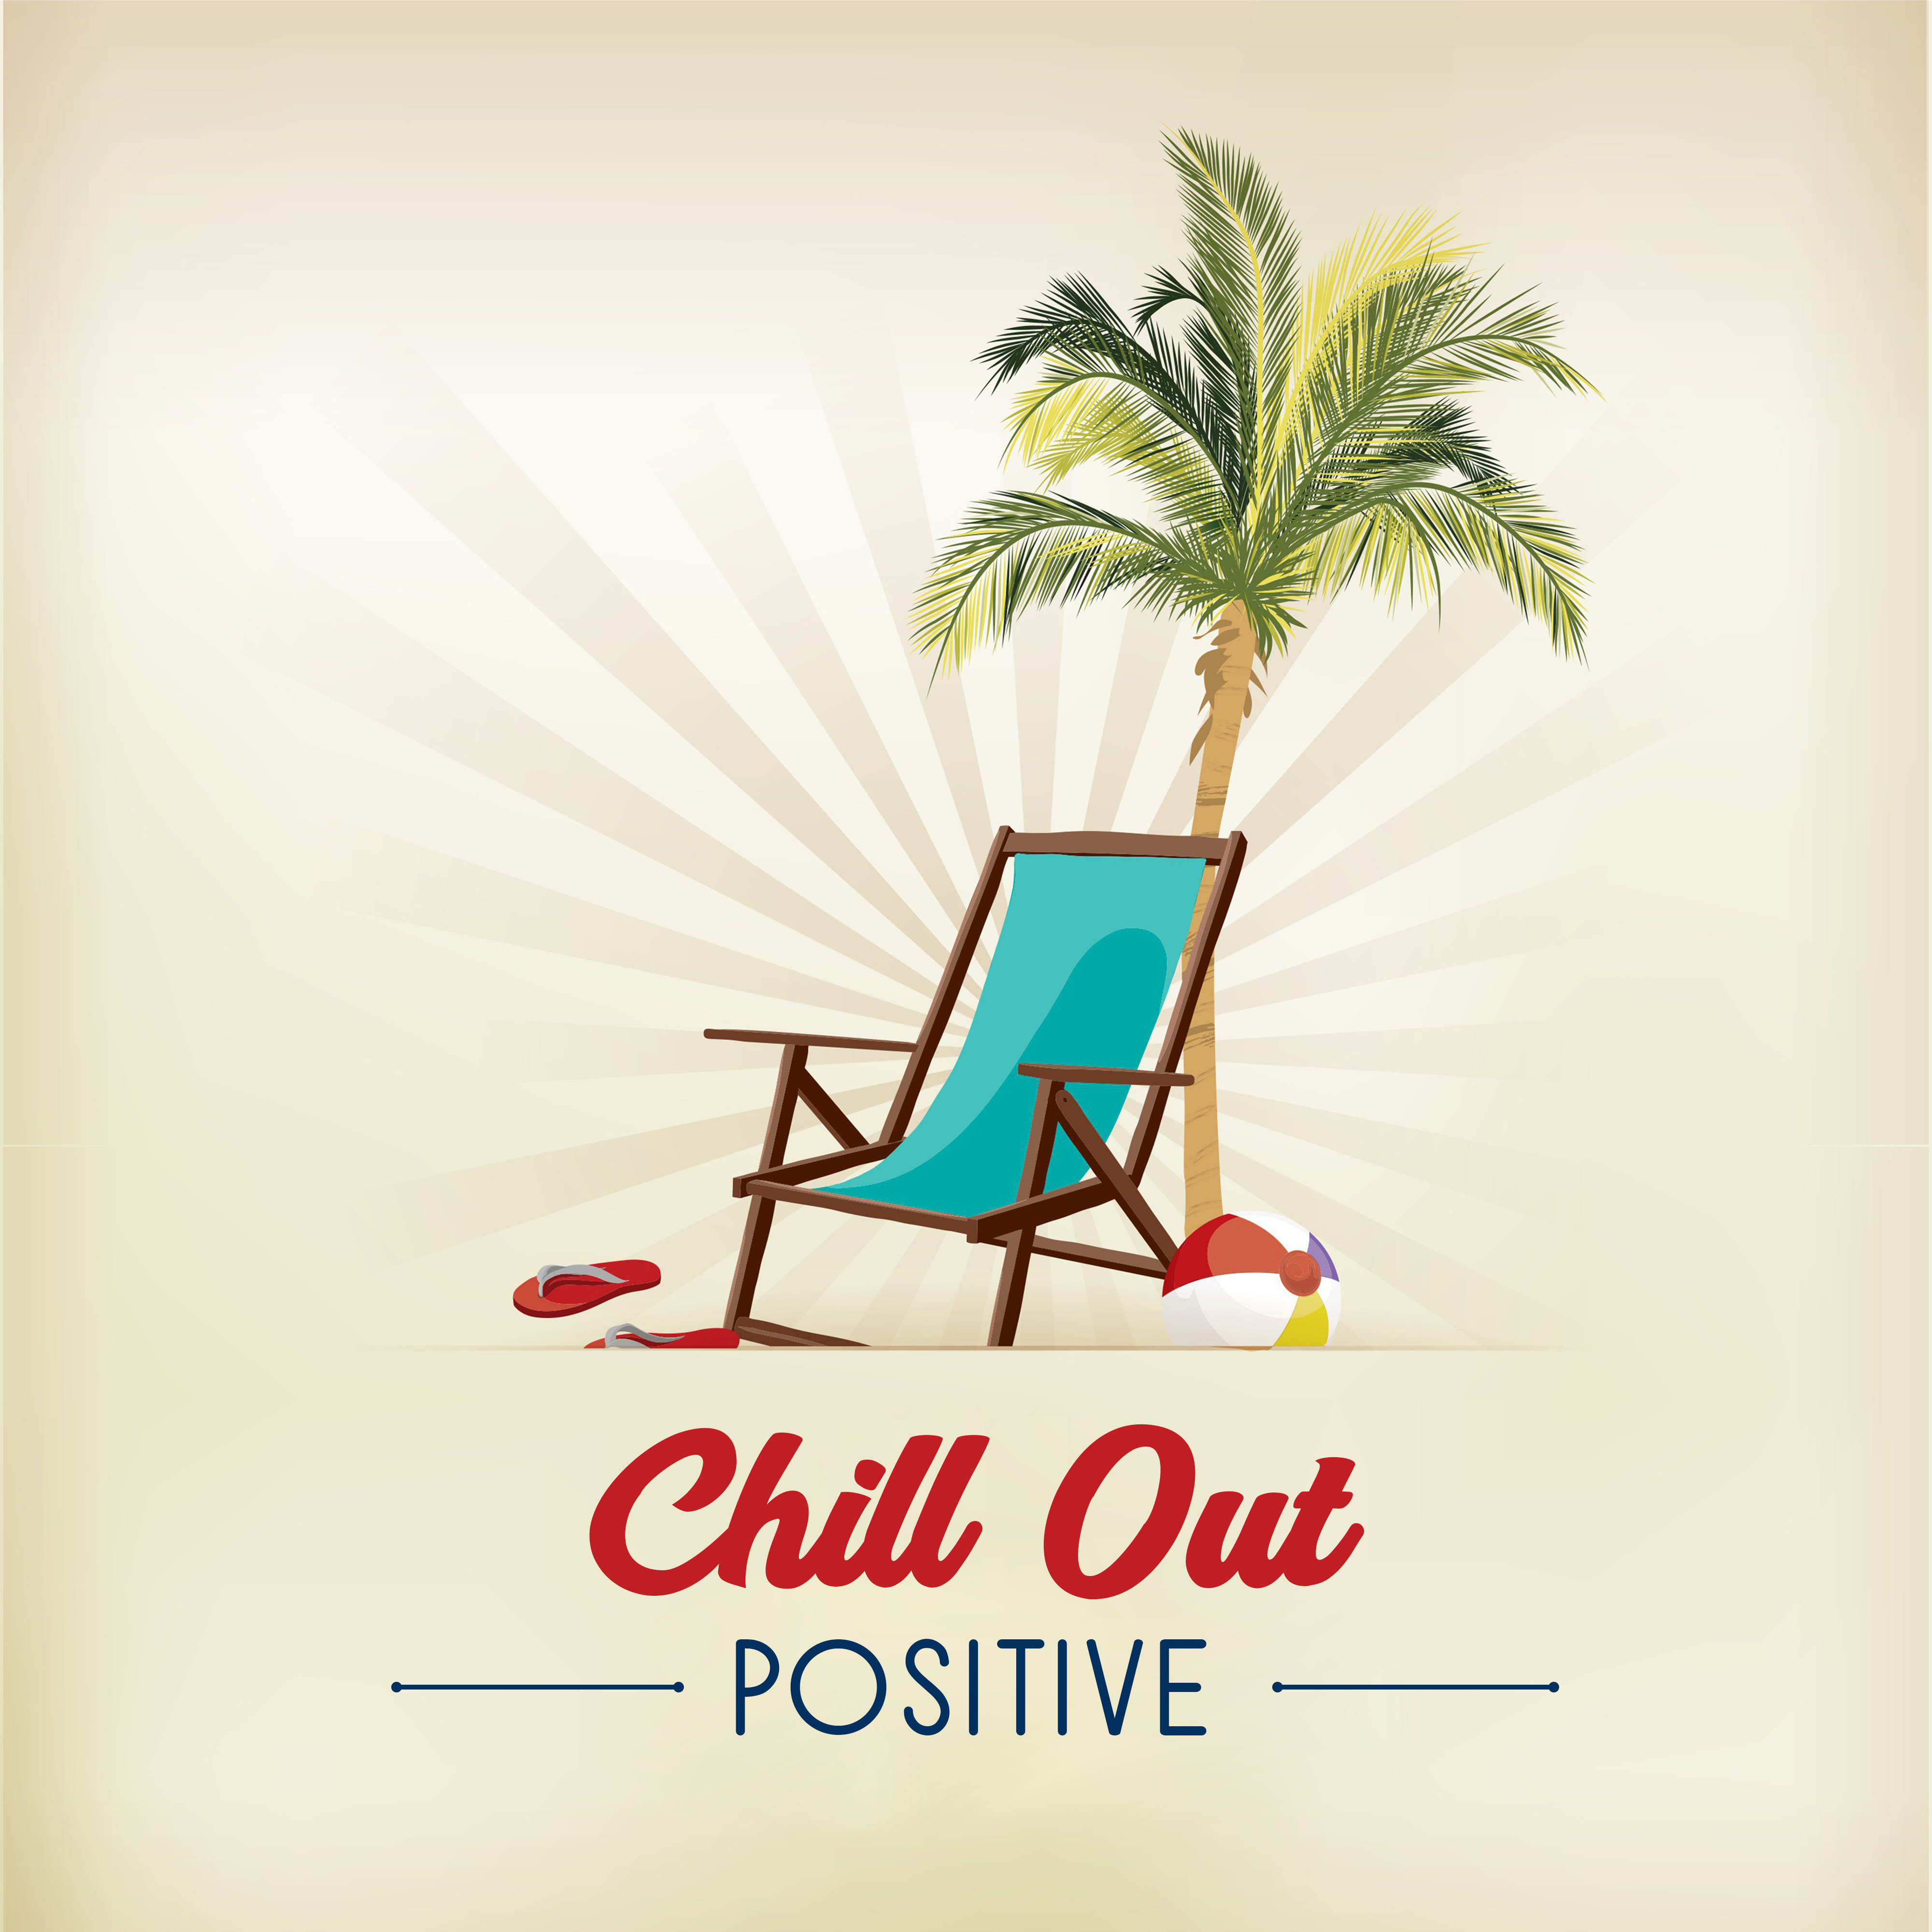 Chill Out Positive  Summer Music, Chill Out 2017, Garden Party, Relax by The Pool